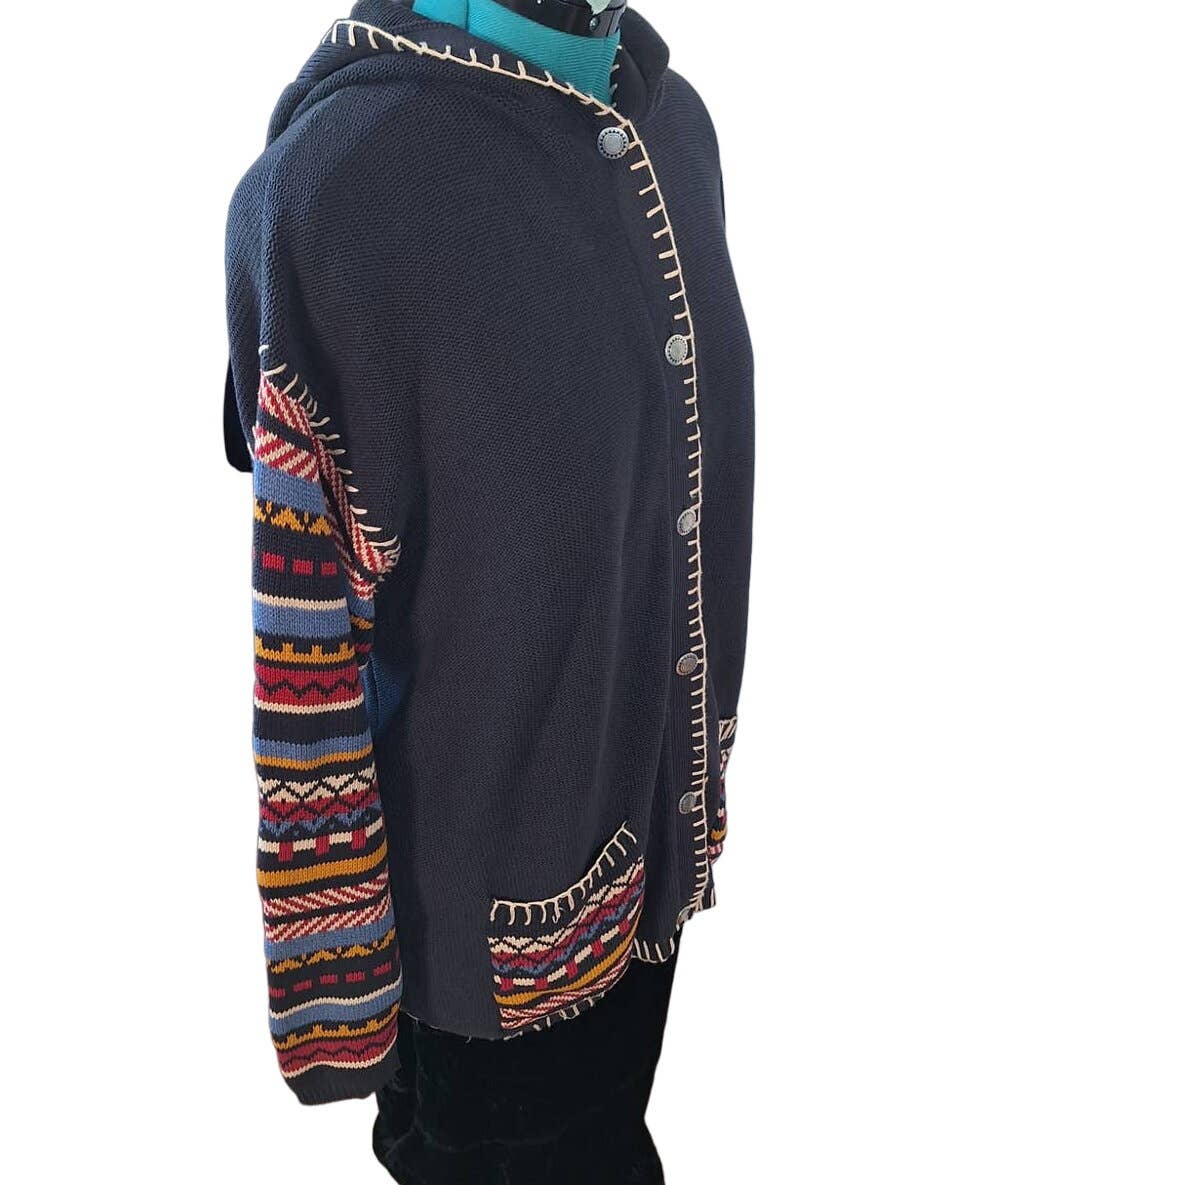 Vintage 90s All Cotton Boxy Hooded Cardigan Sweater Women's L/XL (Chest 52"+) - themallvintage The Mall Vintage